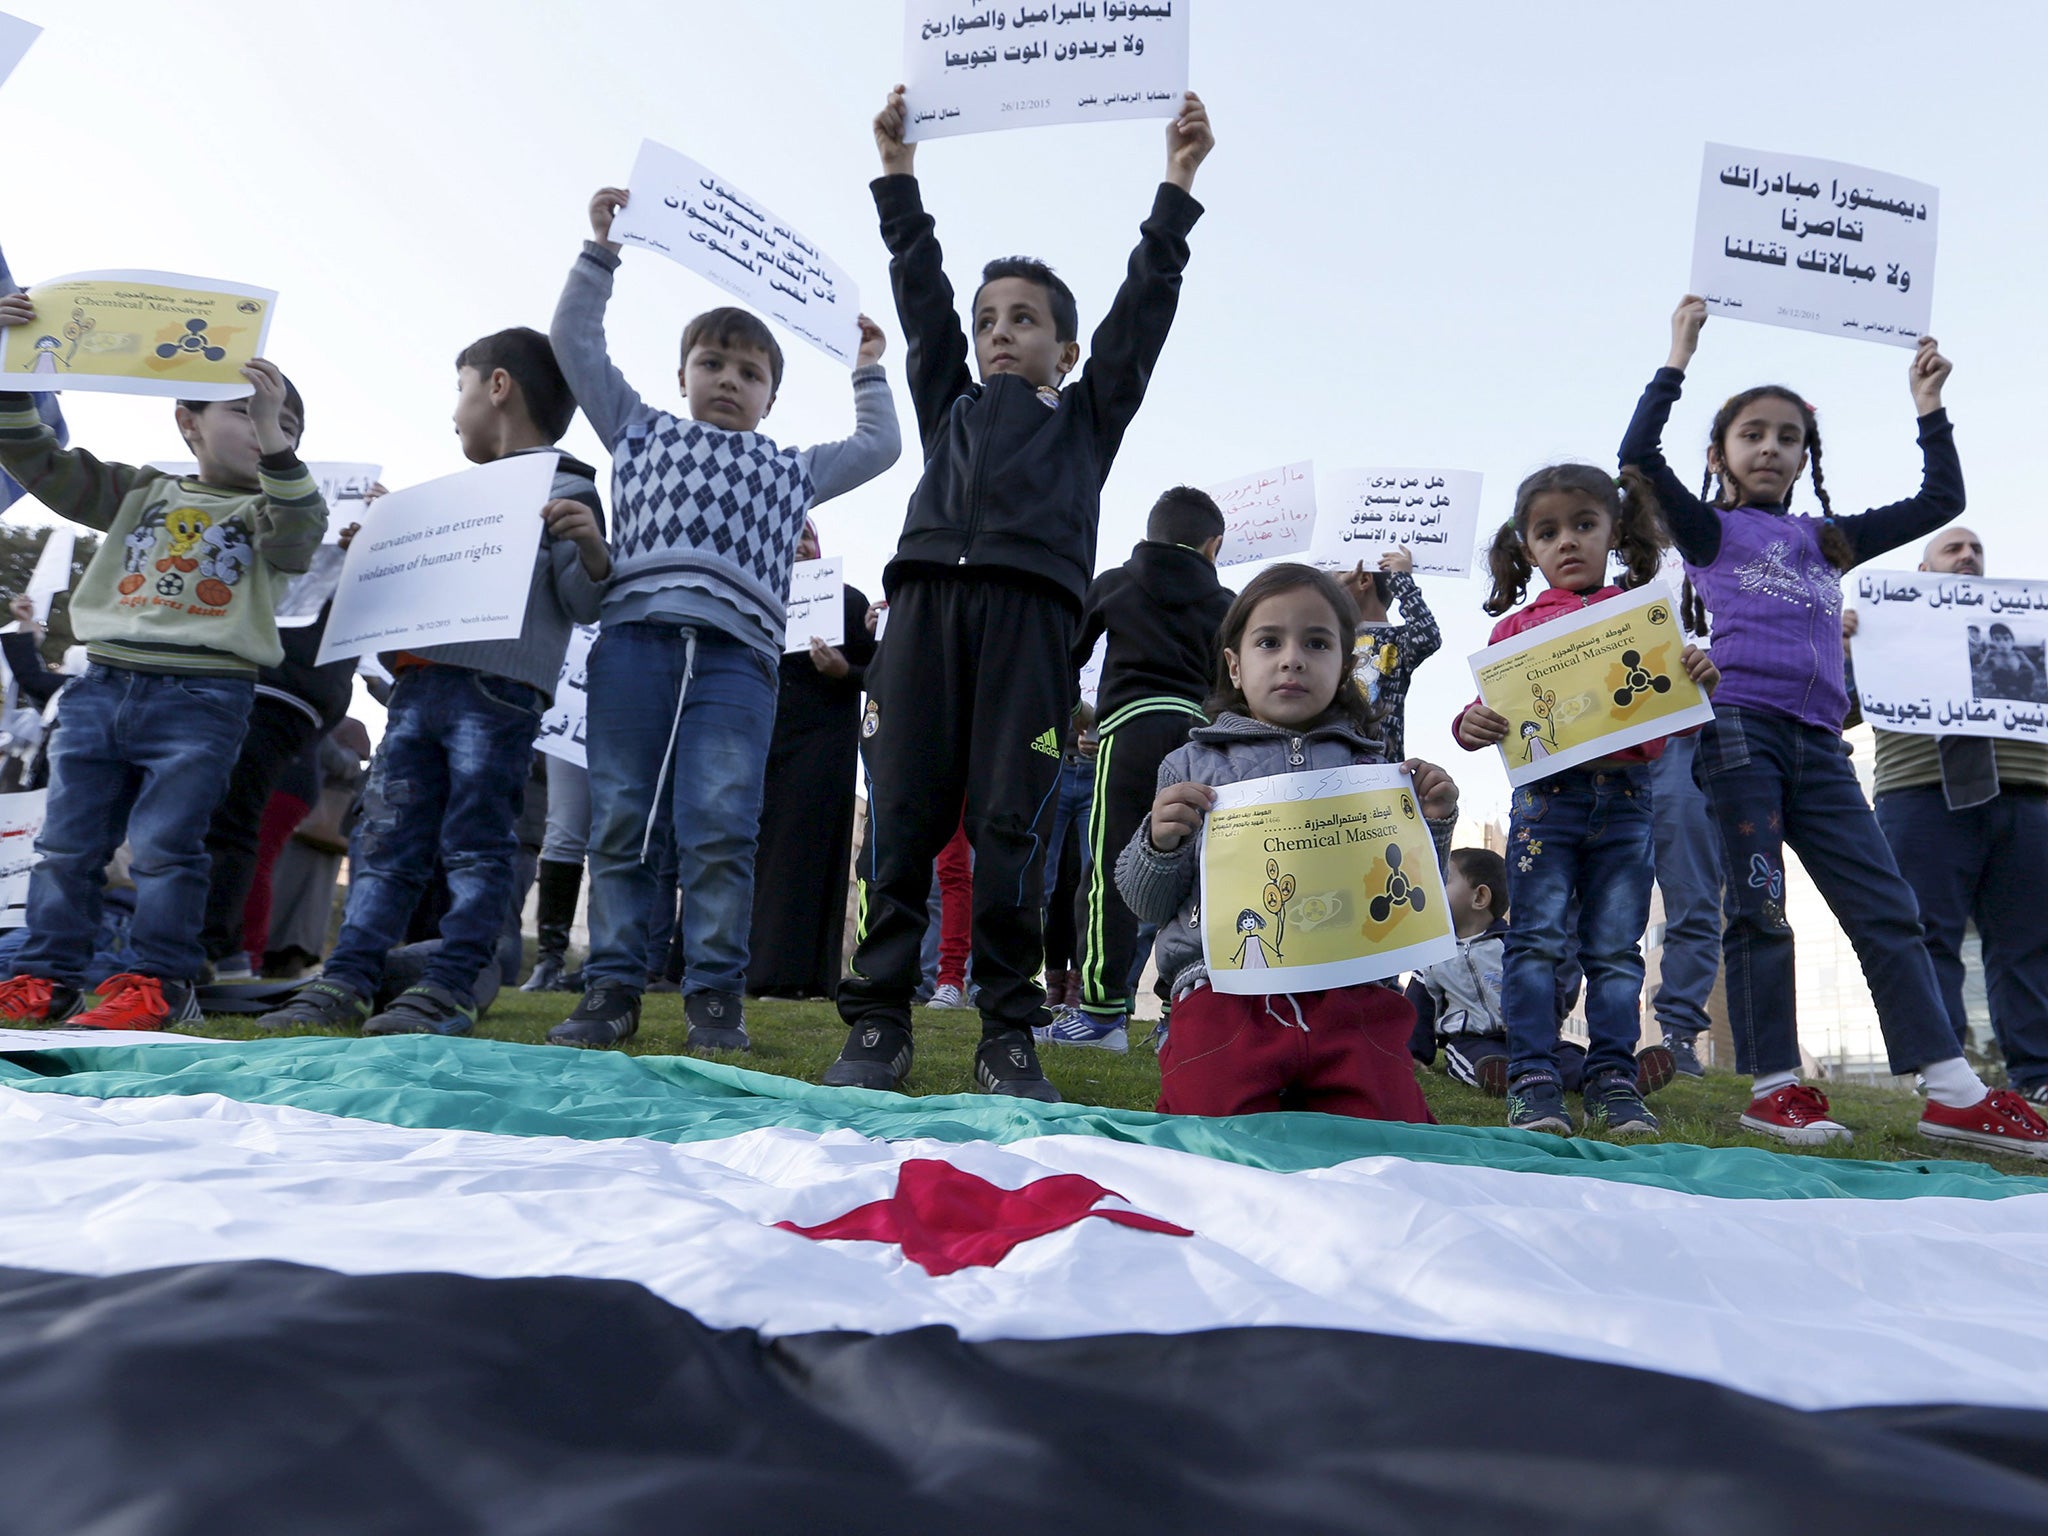 Children carry placards demanding that the siege of Madaya and Zabadani in Syria is lifted, in front of the offices of the UN headquarters in Beirut, Lebanon